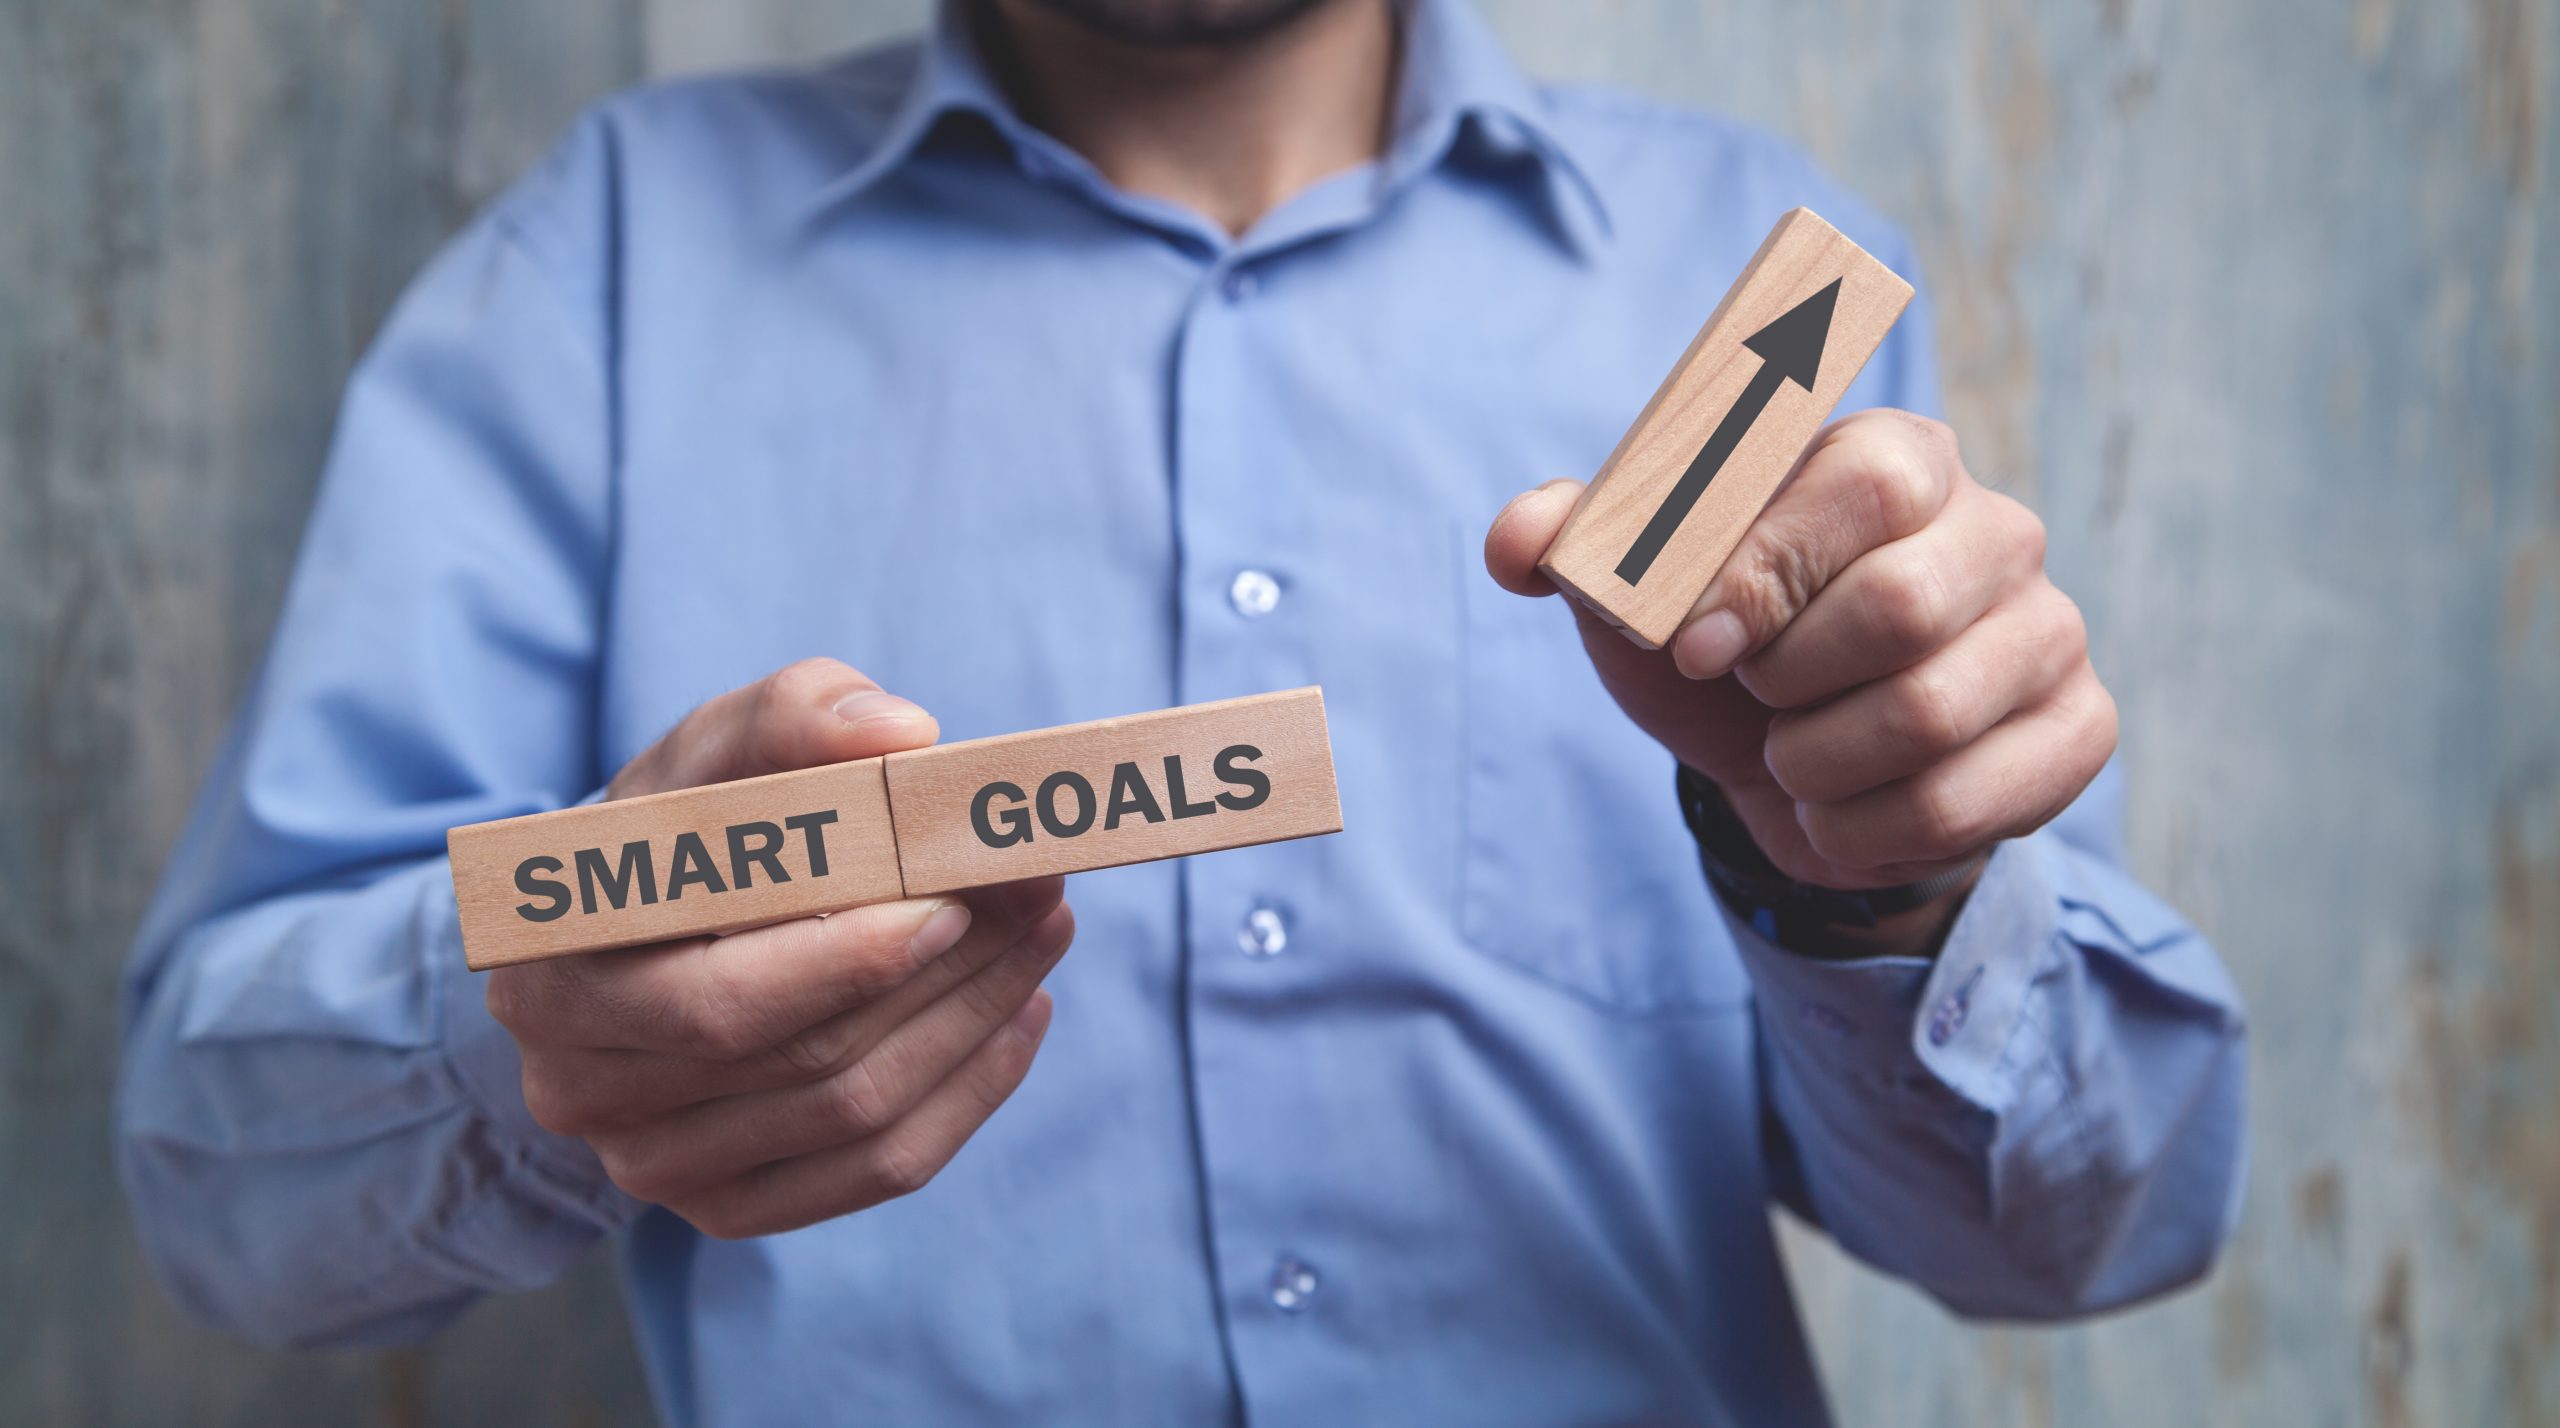 Set smart goals. Search for a complete loan management system.